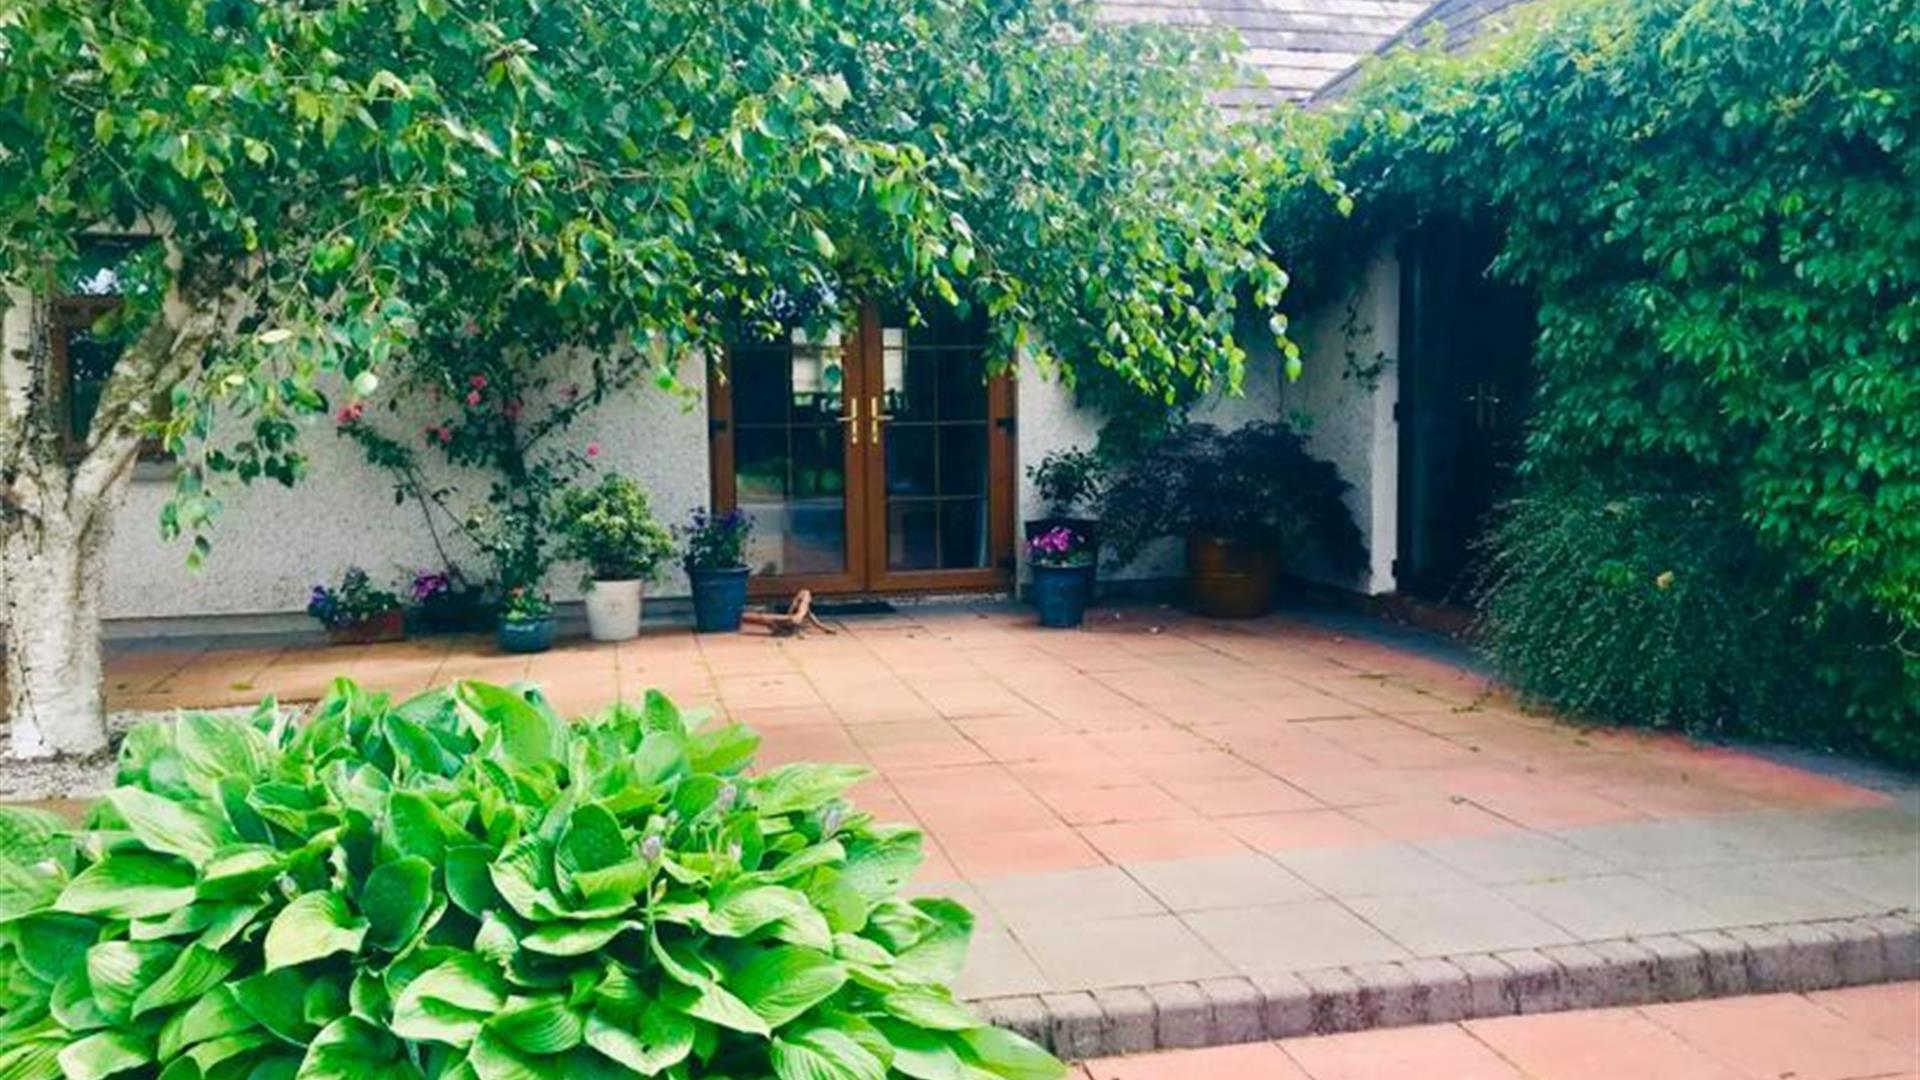 Courtyard with green hedges, vines and a tree in front of a house